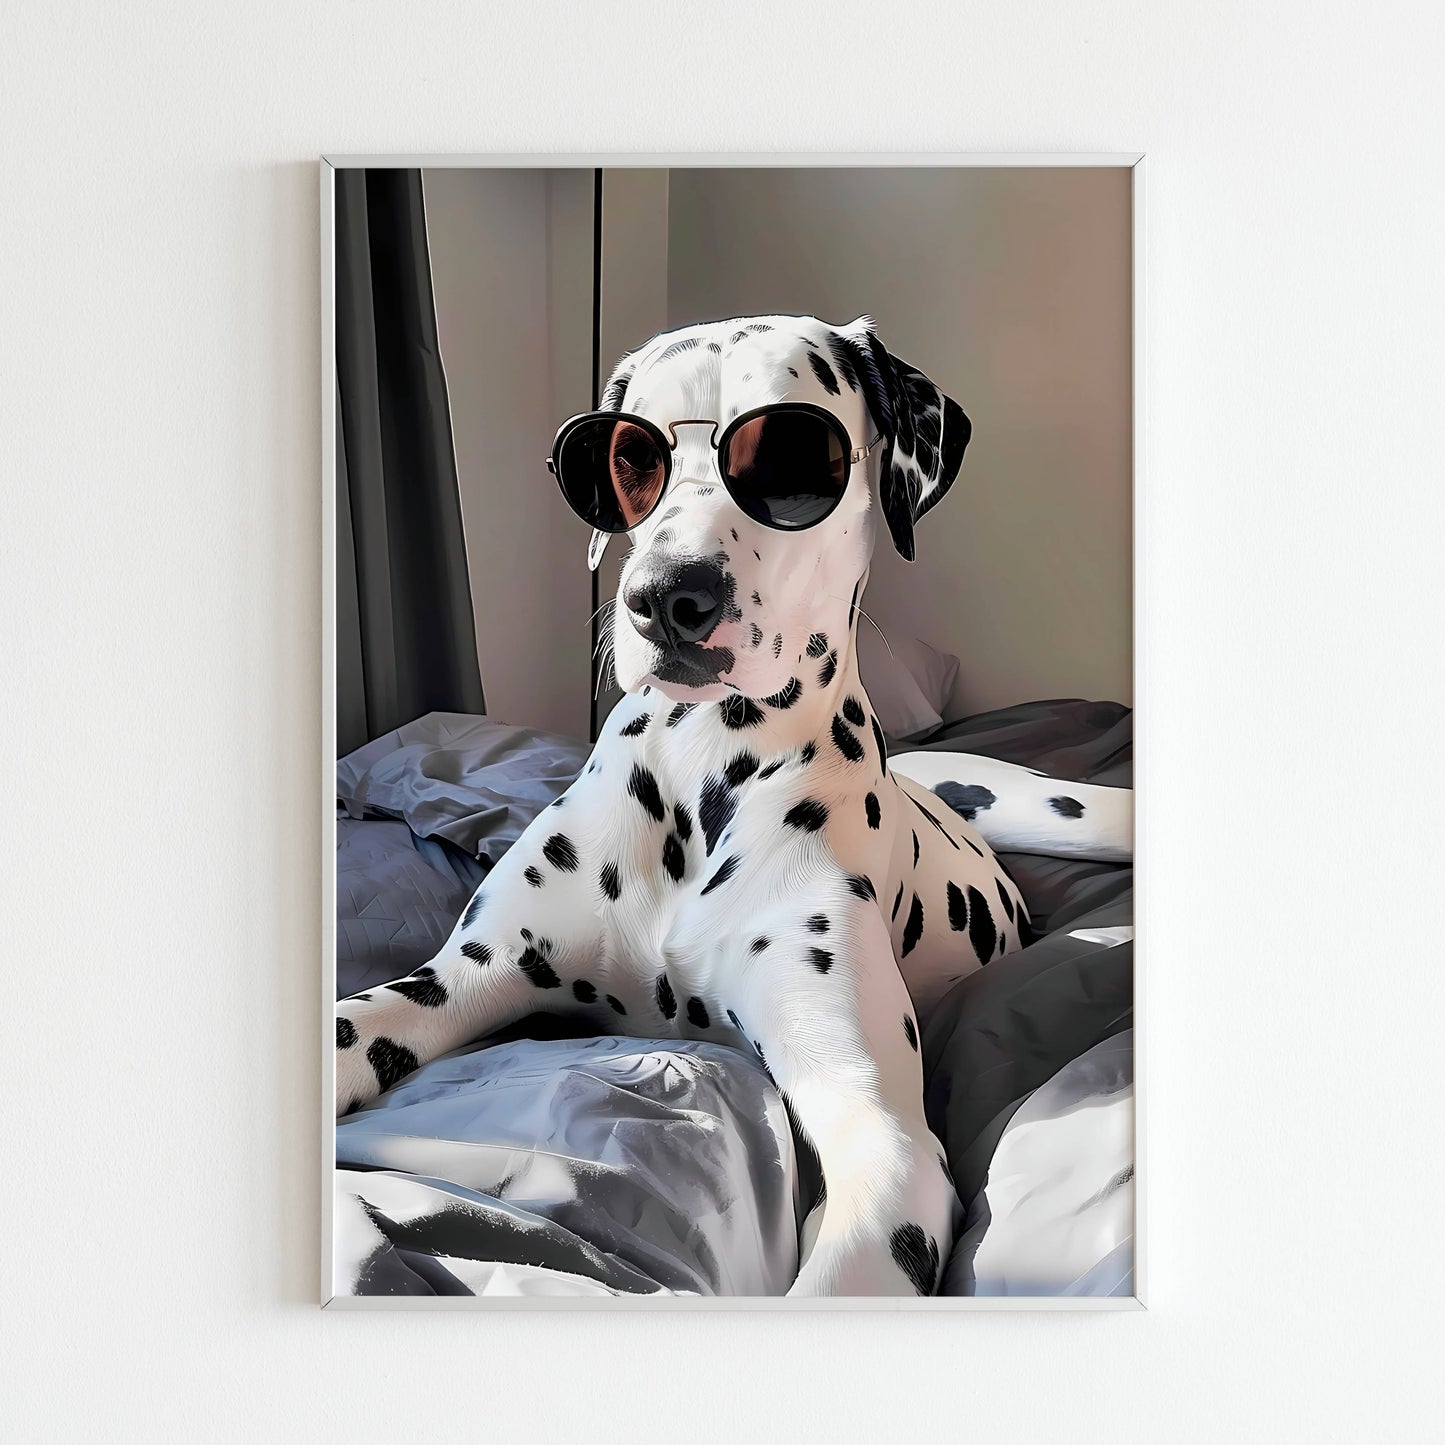 Capture the spotted charm and coolness of a Dalmatian with this printable poster (physical or digital).